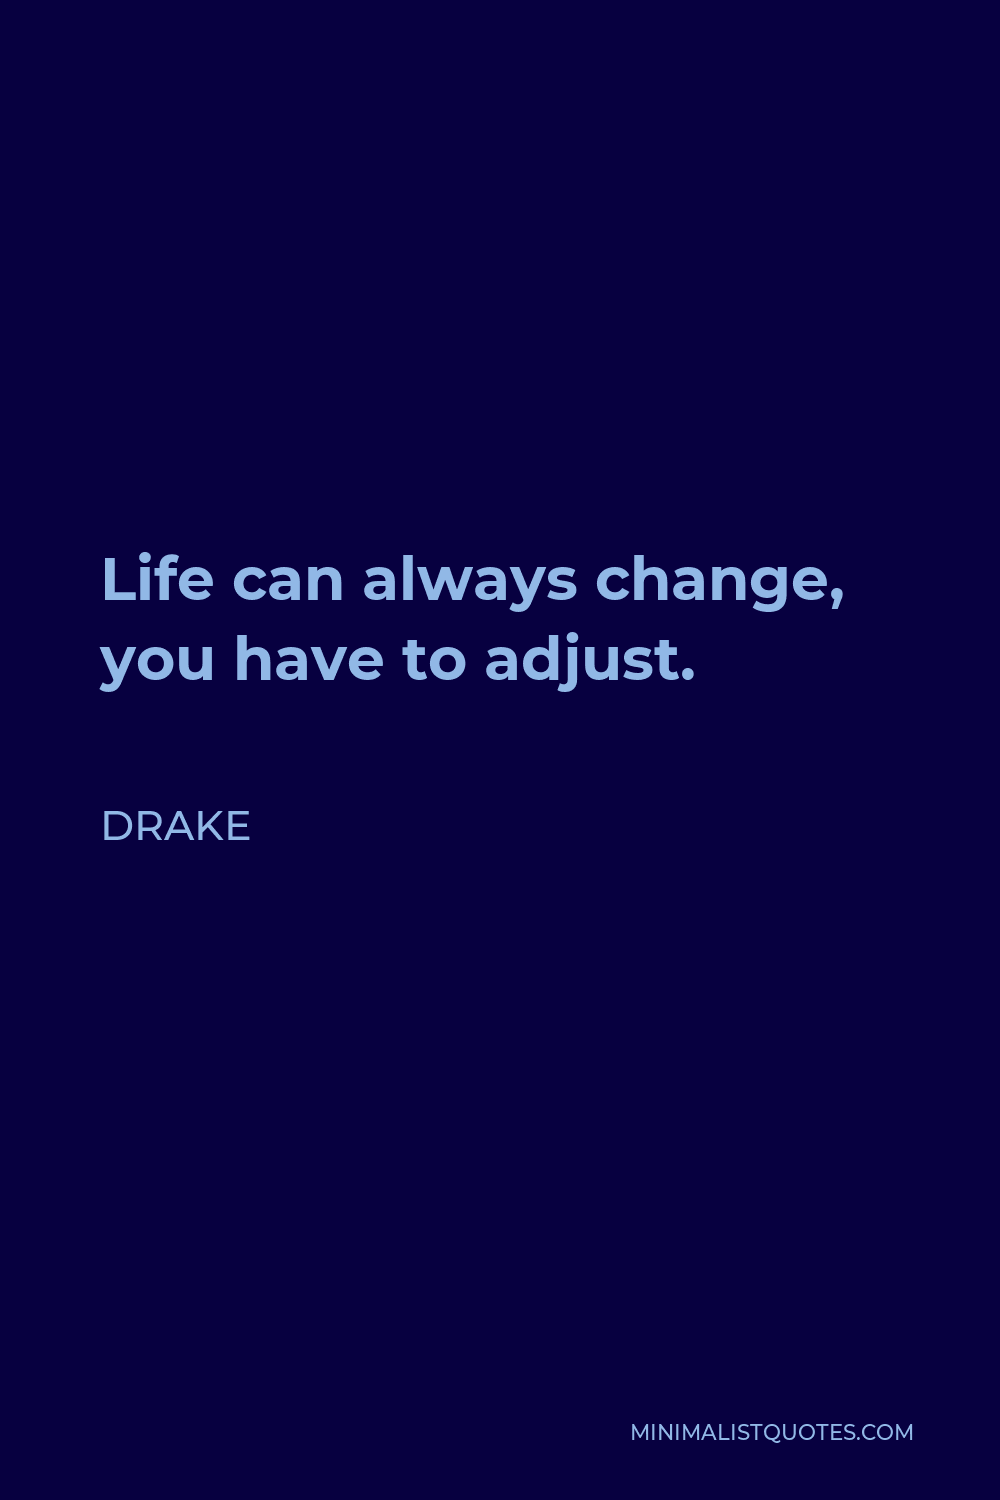 Drake Quote - Life can always change, you have to adjust.